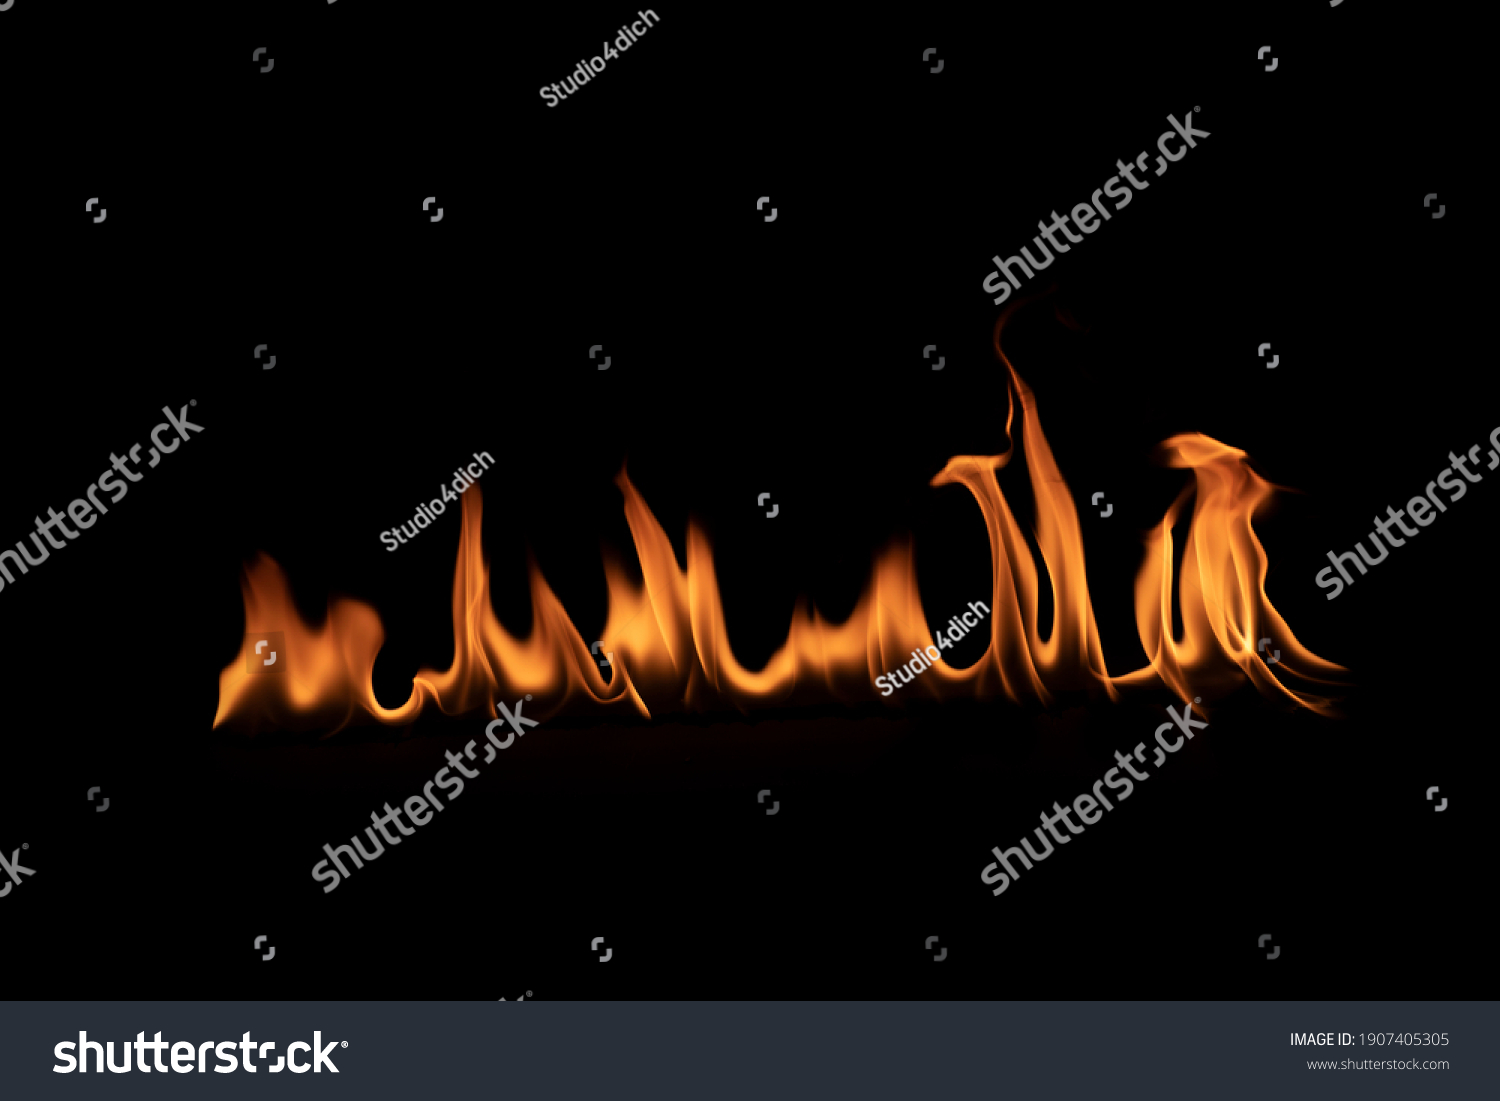 Abstract blaze fire flame texture for banner background
Texture of fire flames  on a black background. Real fiery bonfire for creative design elements. #1907405305